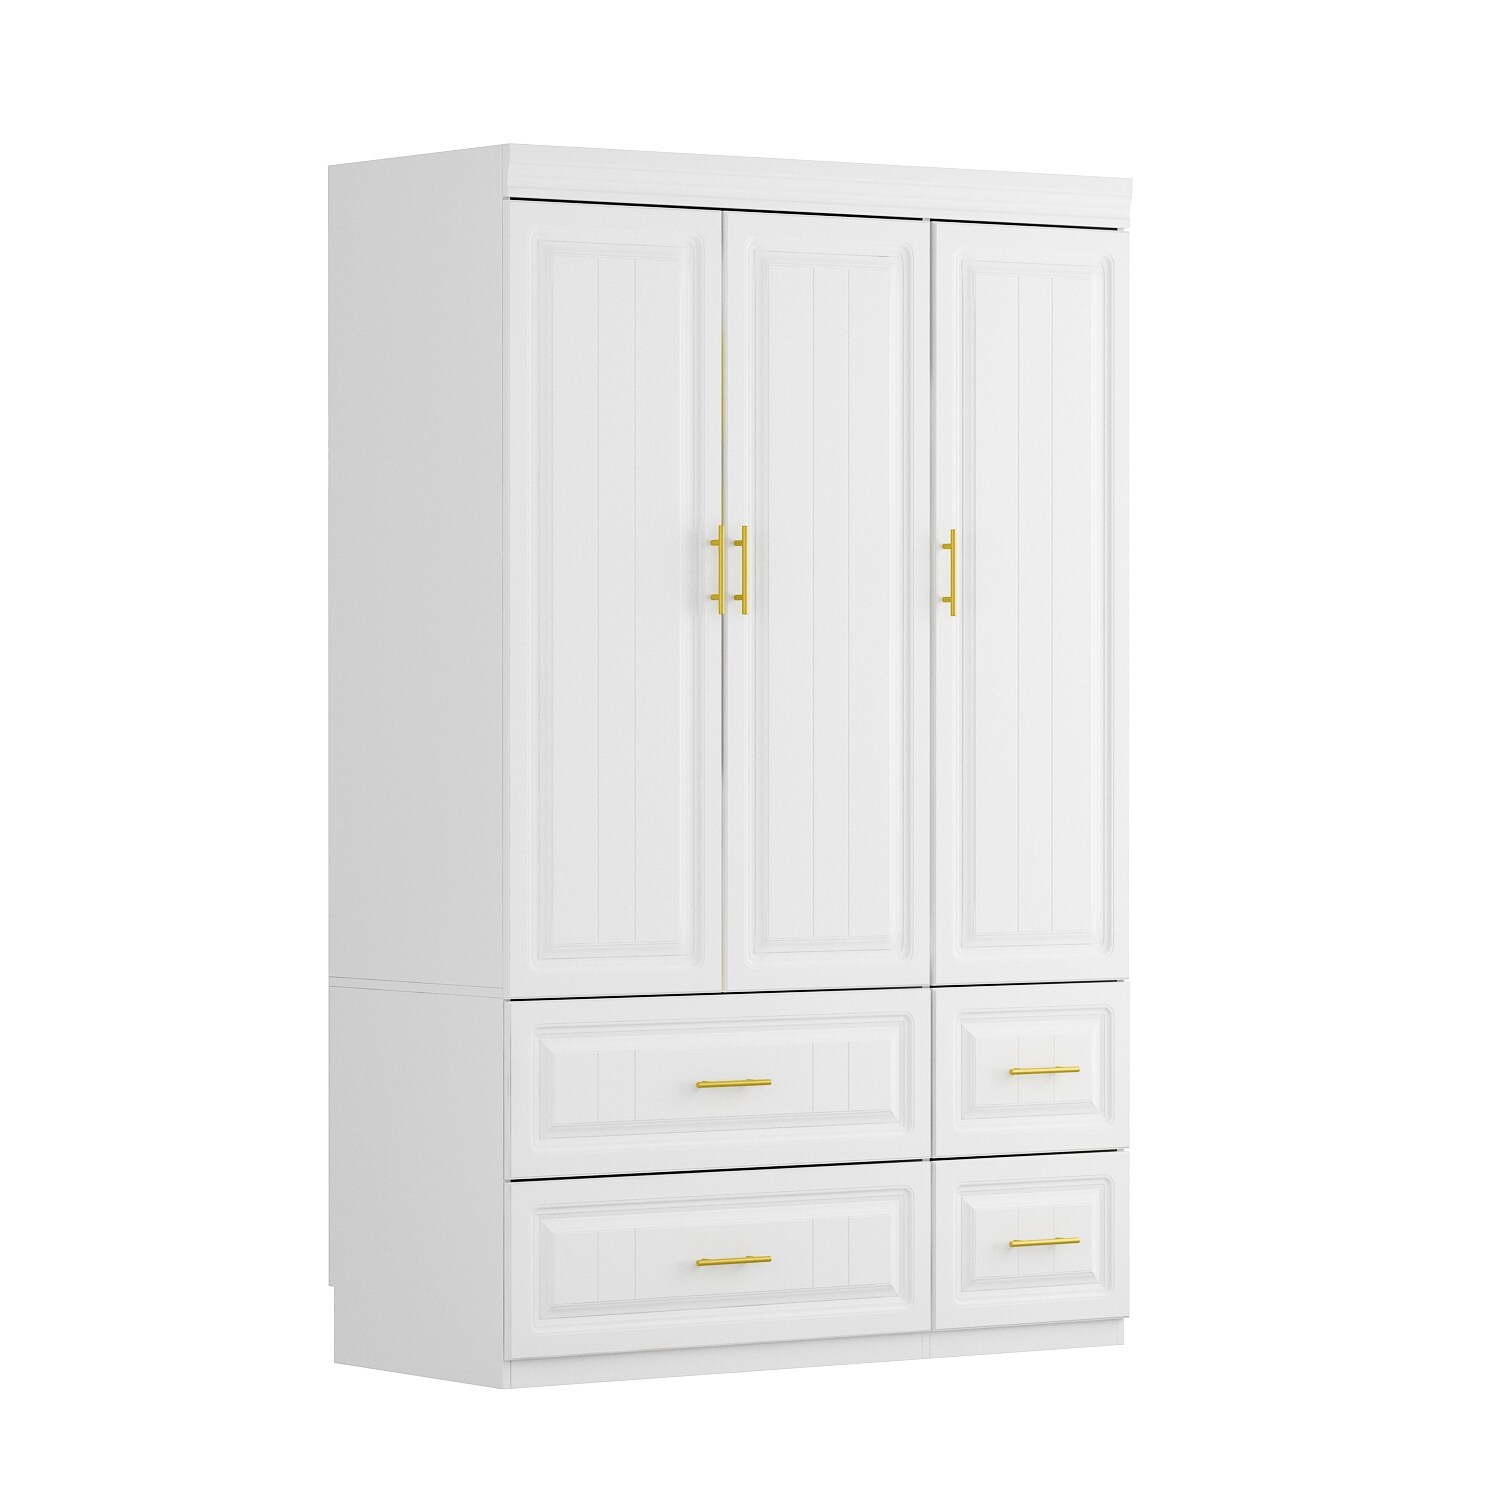 https://ak1.ostkcdn.com/images/products/is/images/direct/b396e70ec0dd6ce3d71be24b1e77382dac4c6bf5/Modern-Freestanding-Wardrobe-Armoire-Closet-High-Cabinet-Storage-White.jpg